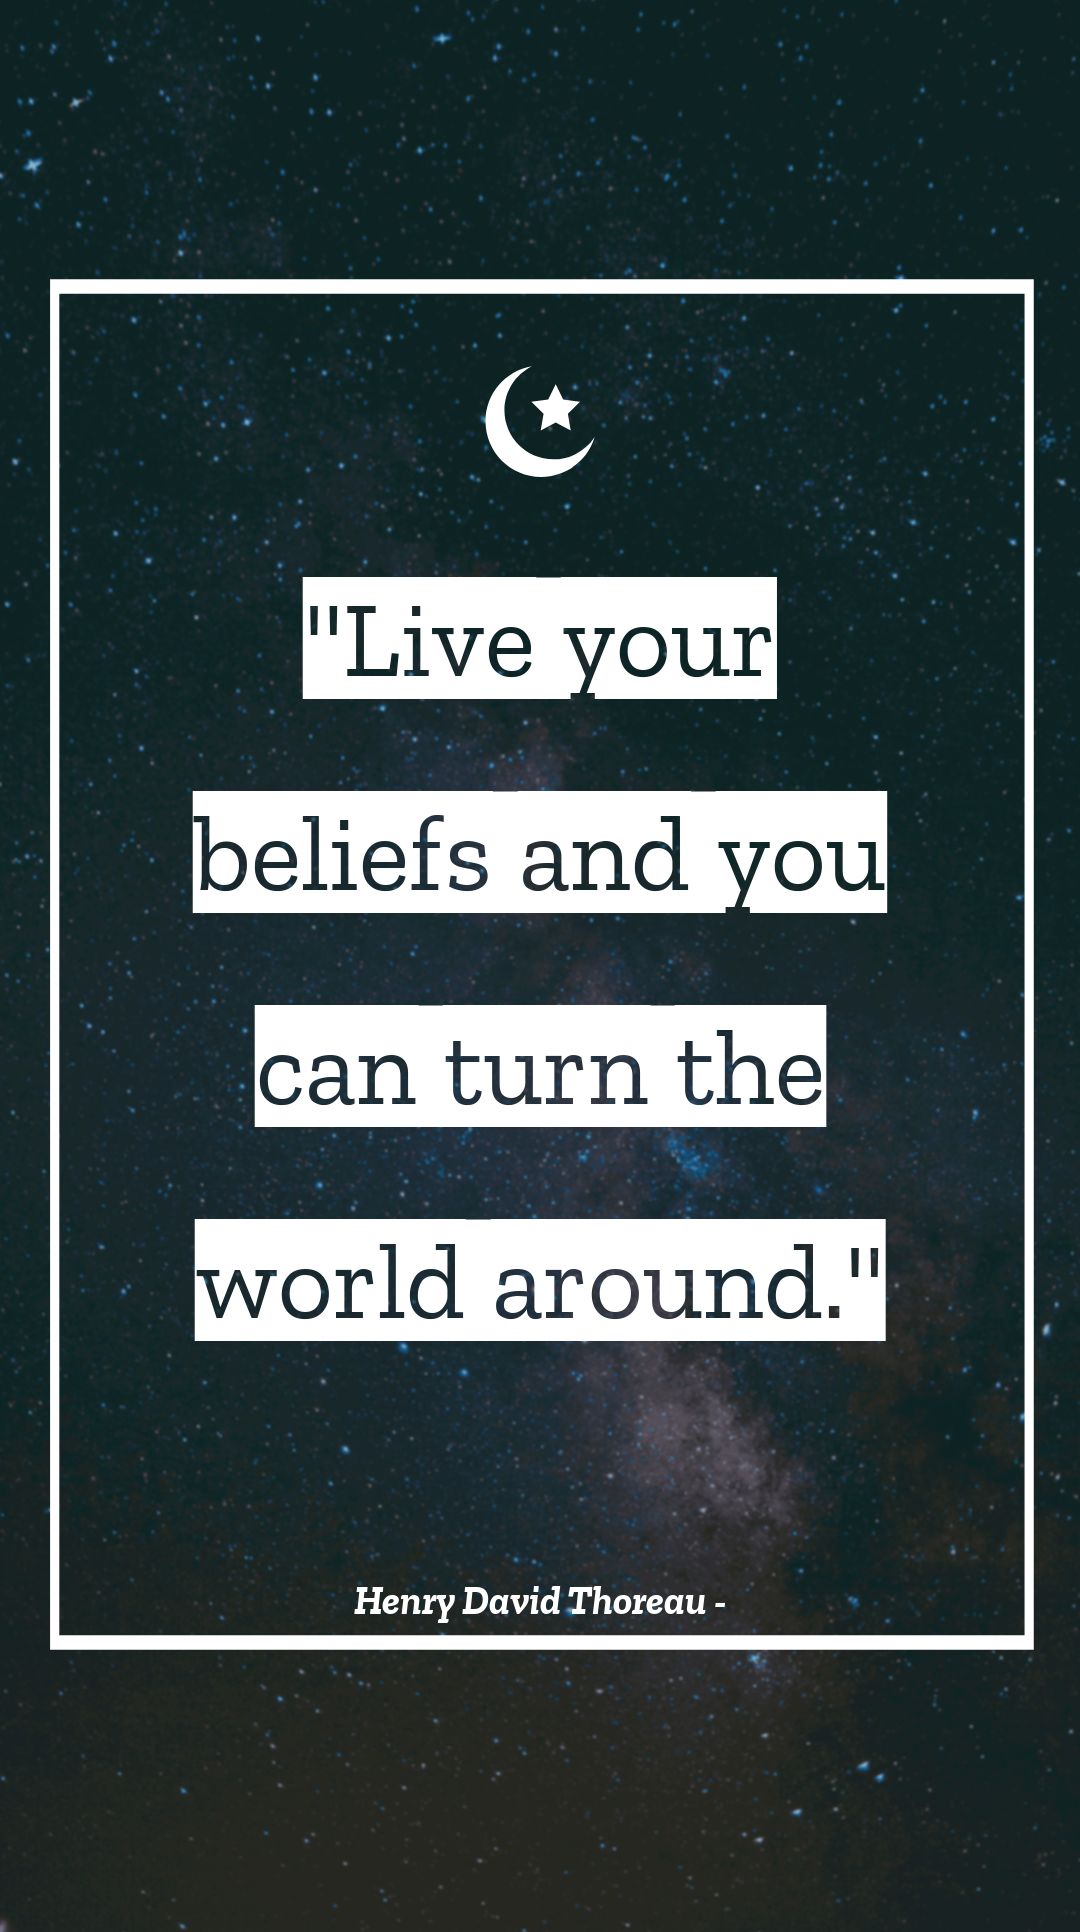 Henry David Thoreau - Live your beliefs and you can turn the world around.